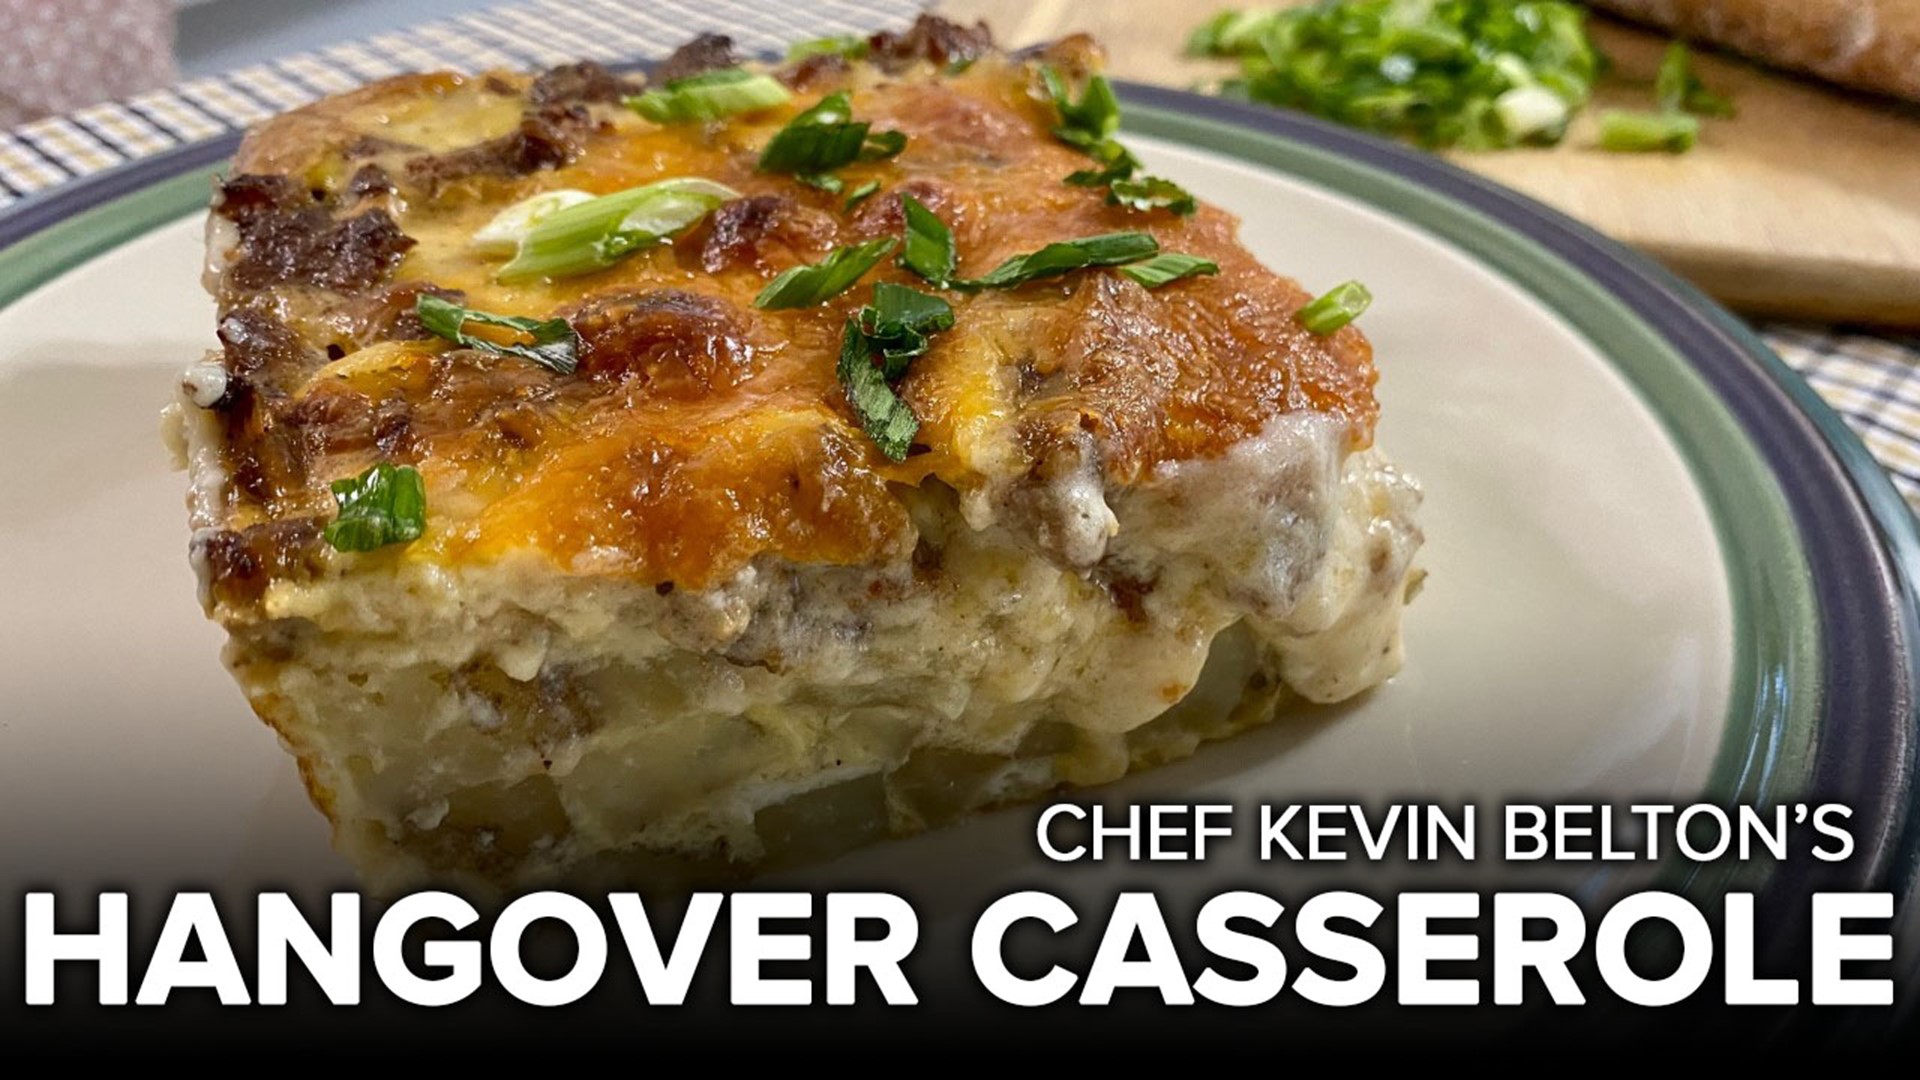 If you celebrated a little too much or stayed out a little too late last night, this hangover casserole is exactly what you need!